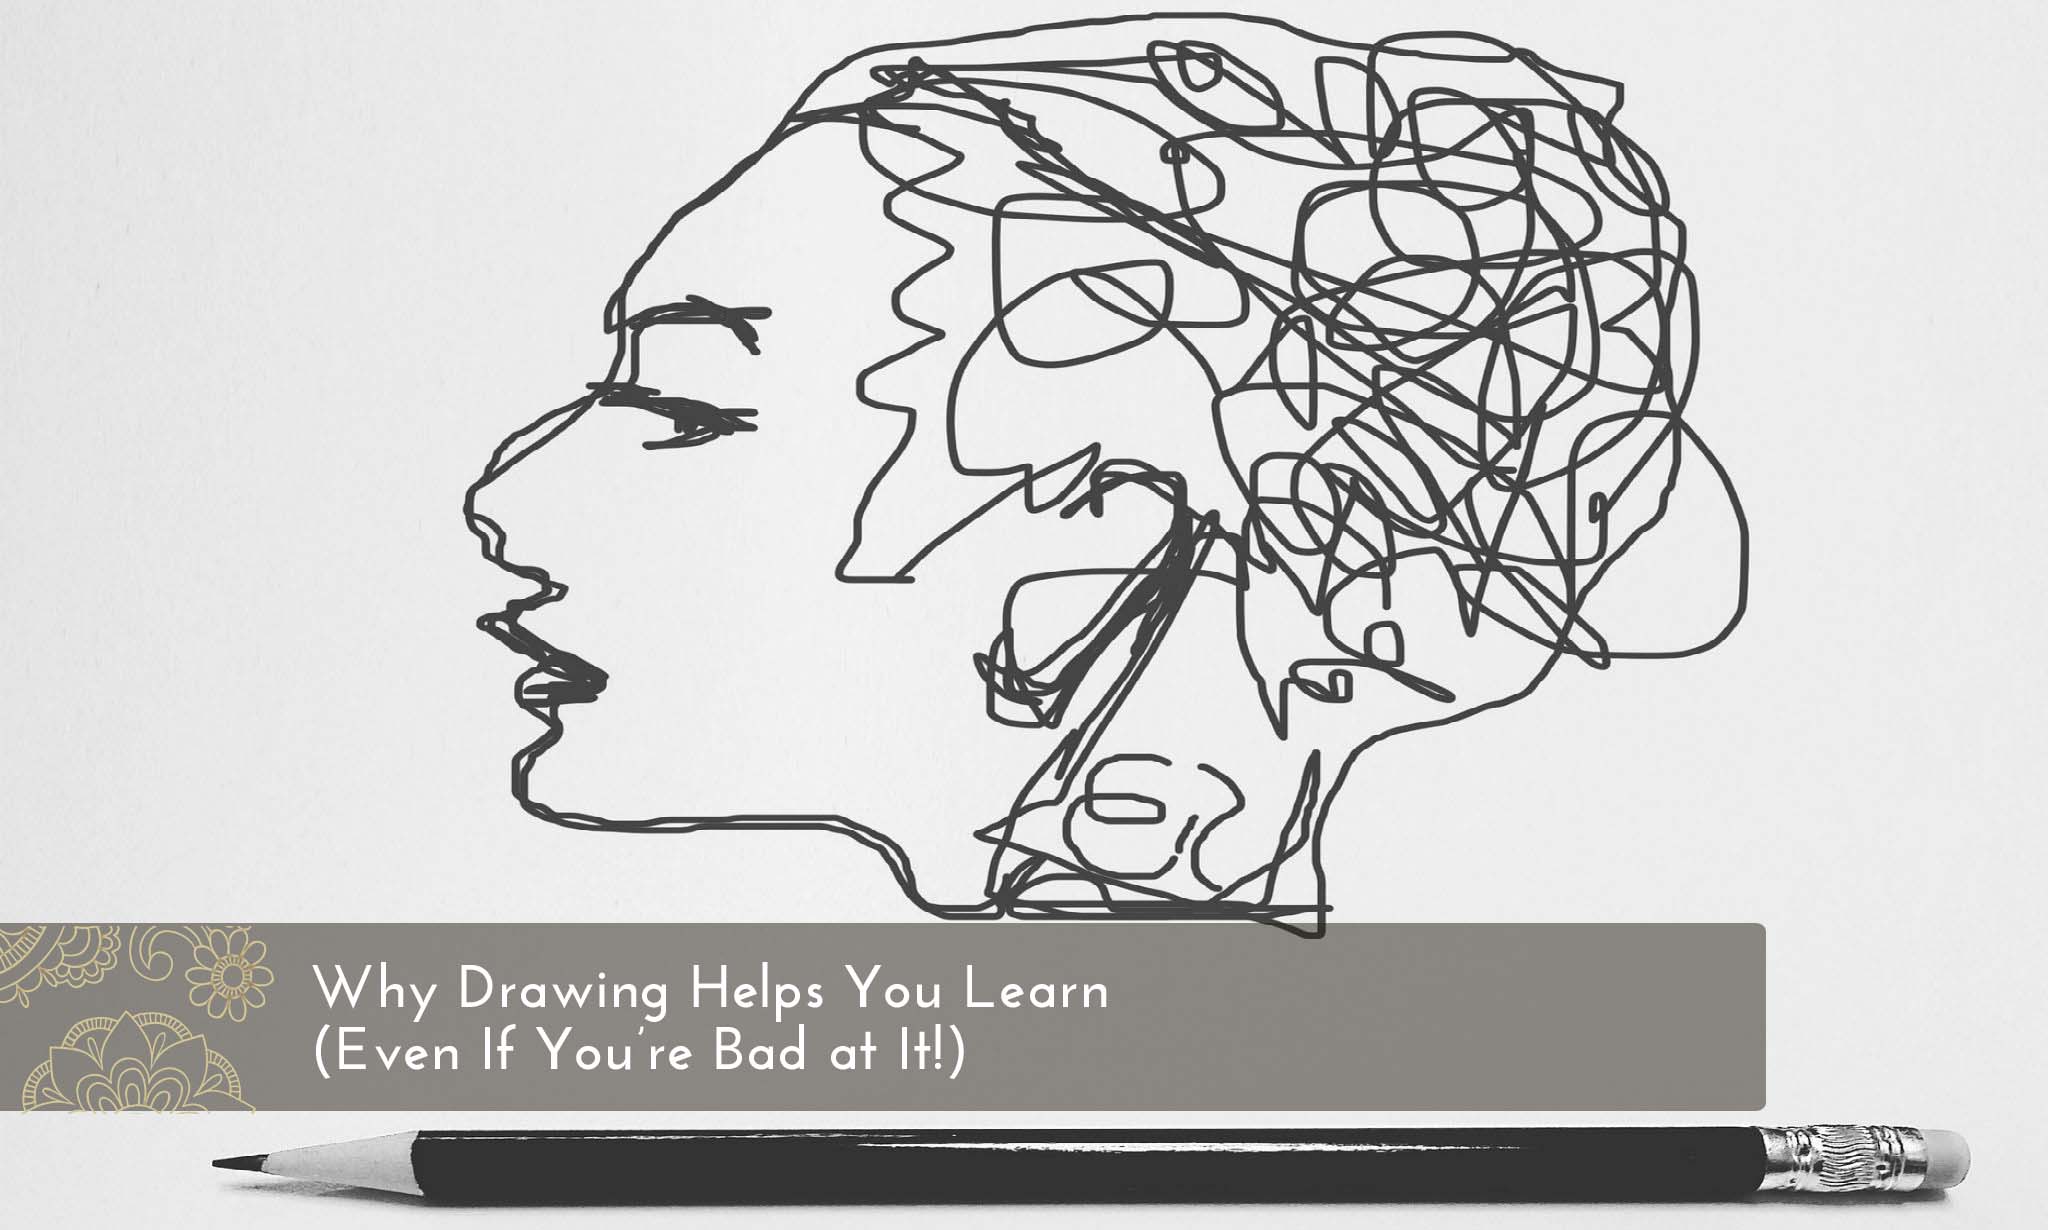 Why Drawing at Explore collection of Why Drawing